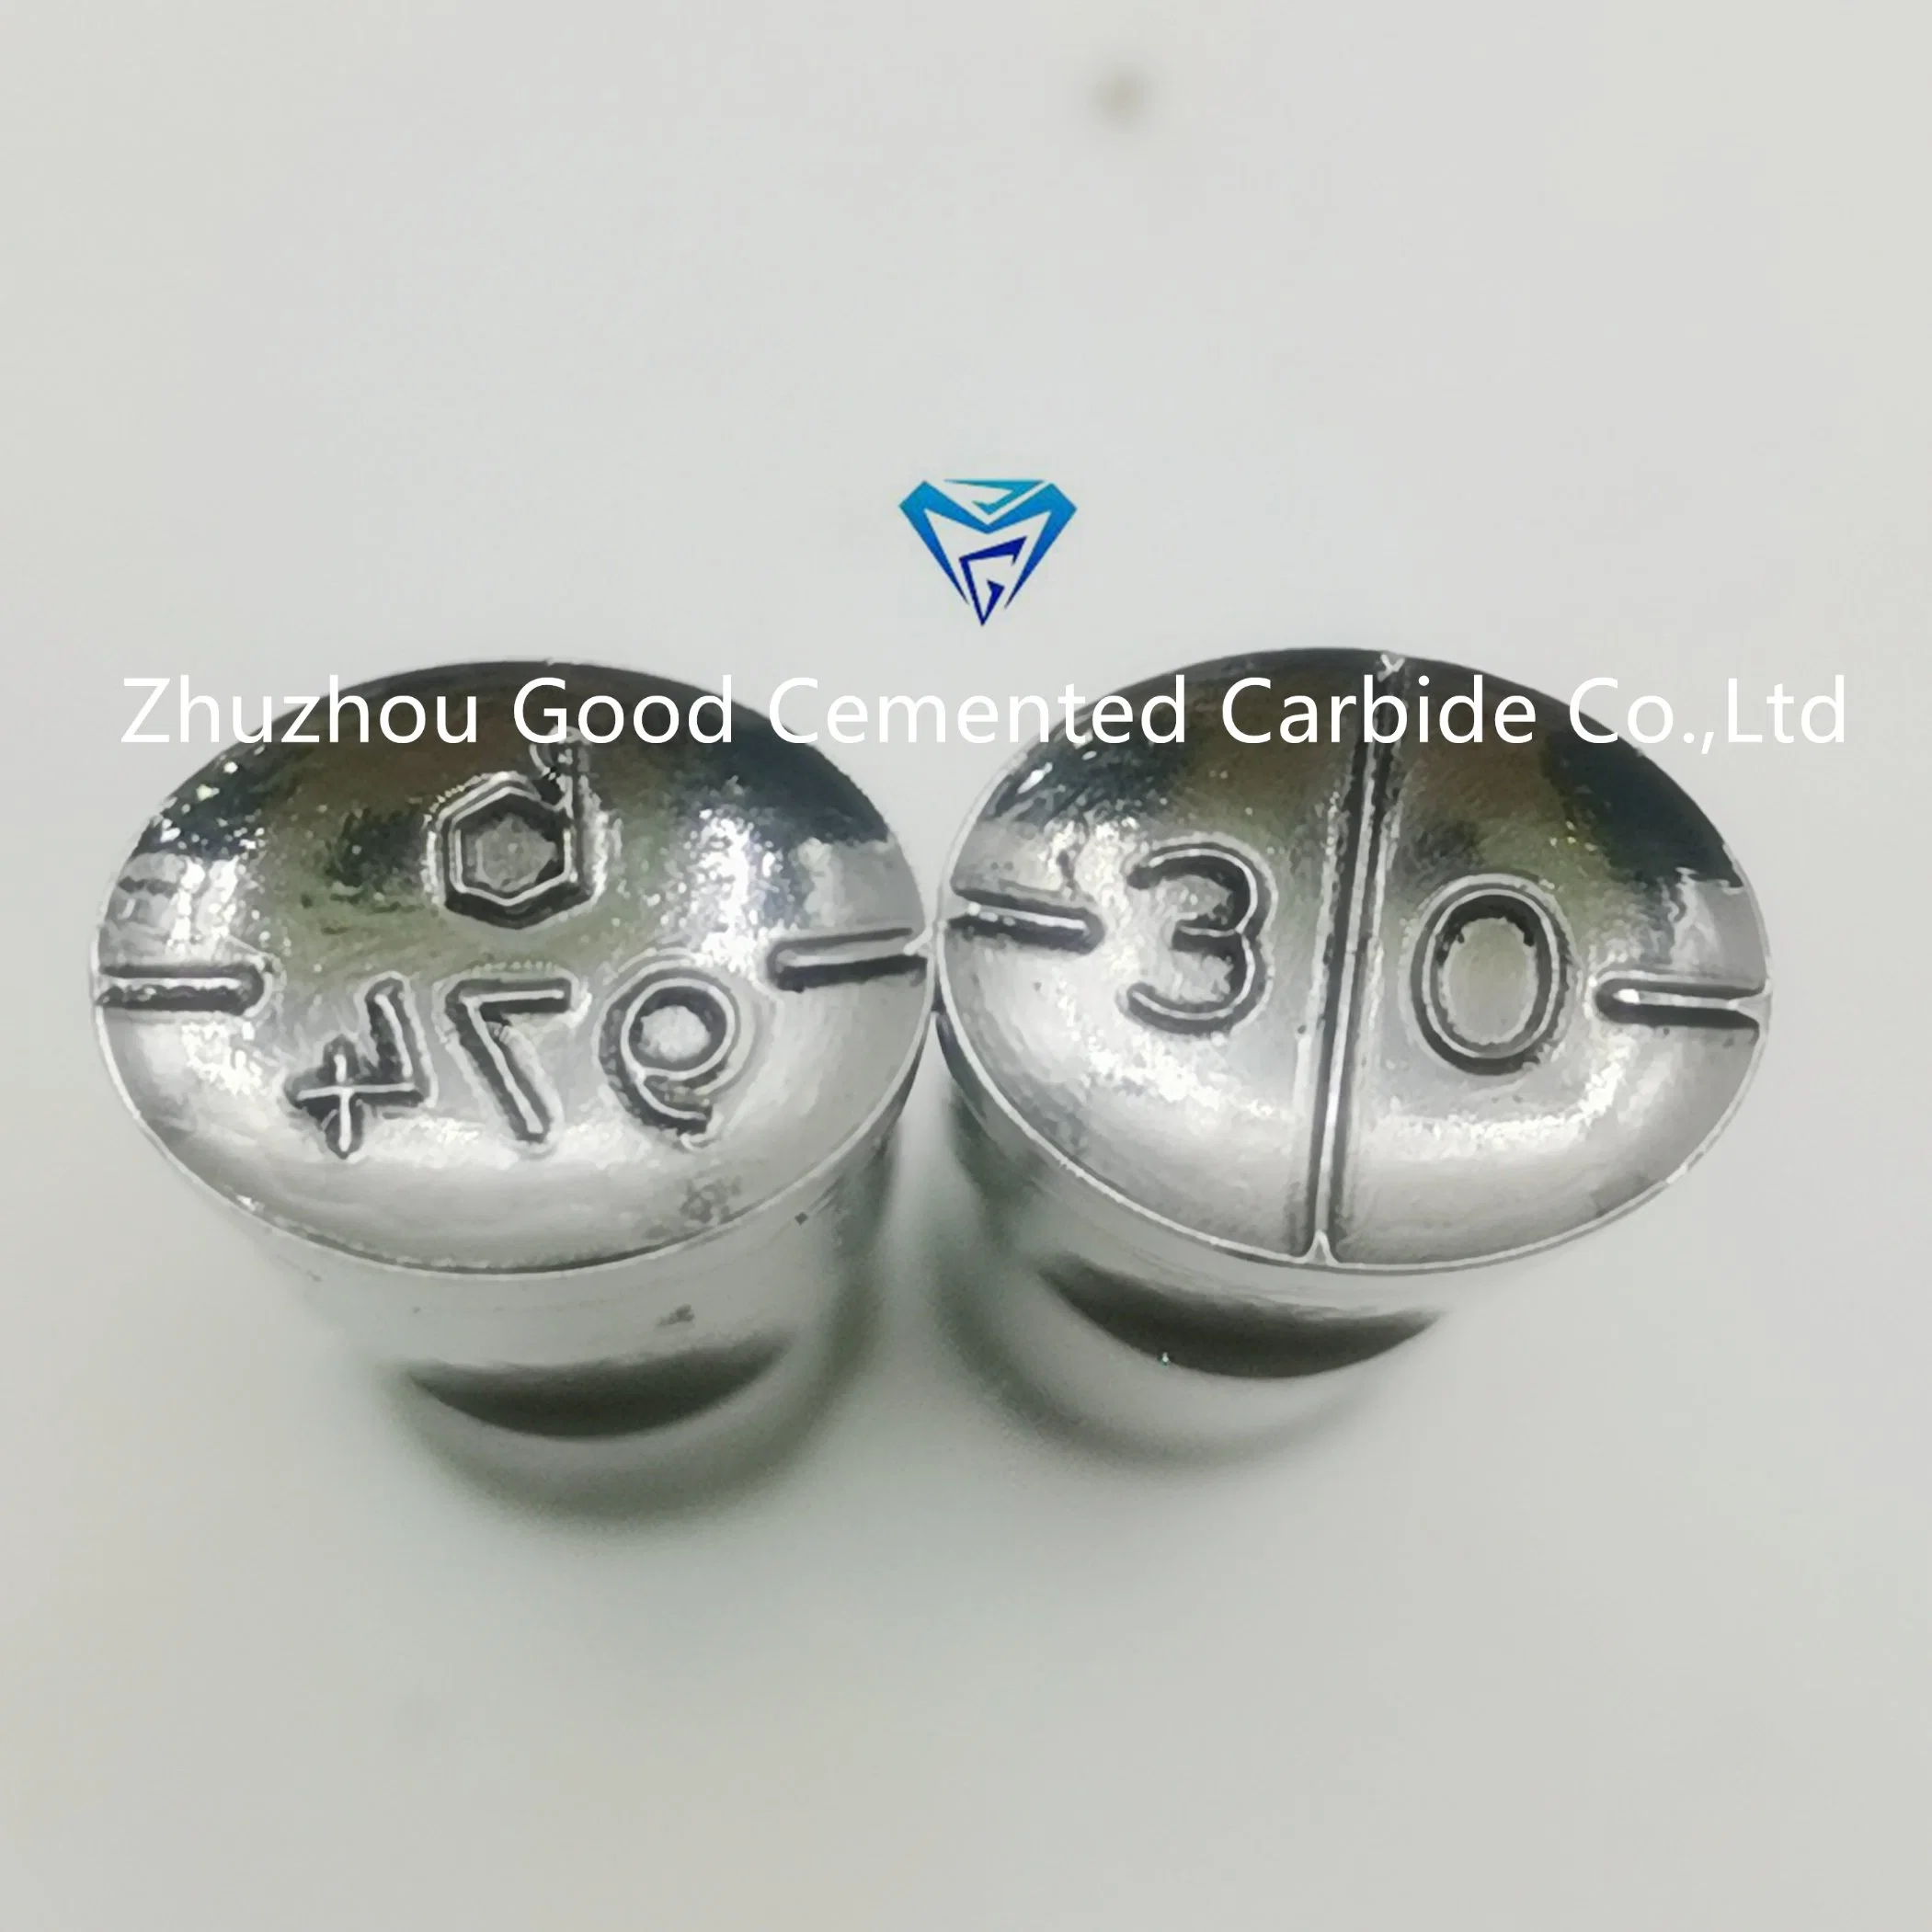 3D Round Pill Sugar Stamp Candy Press Punch Die Set for Tdp0/ Tdp 1.5 or Tdp5 Tdp6 Molds Machine Moulds Stamp Dies 6mm 6.5mm 8mm 10mm